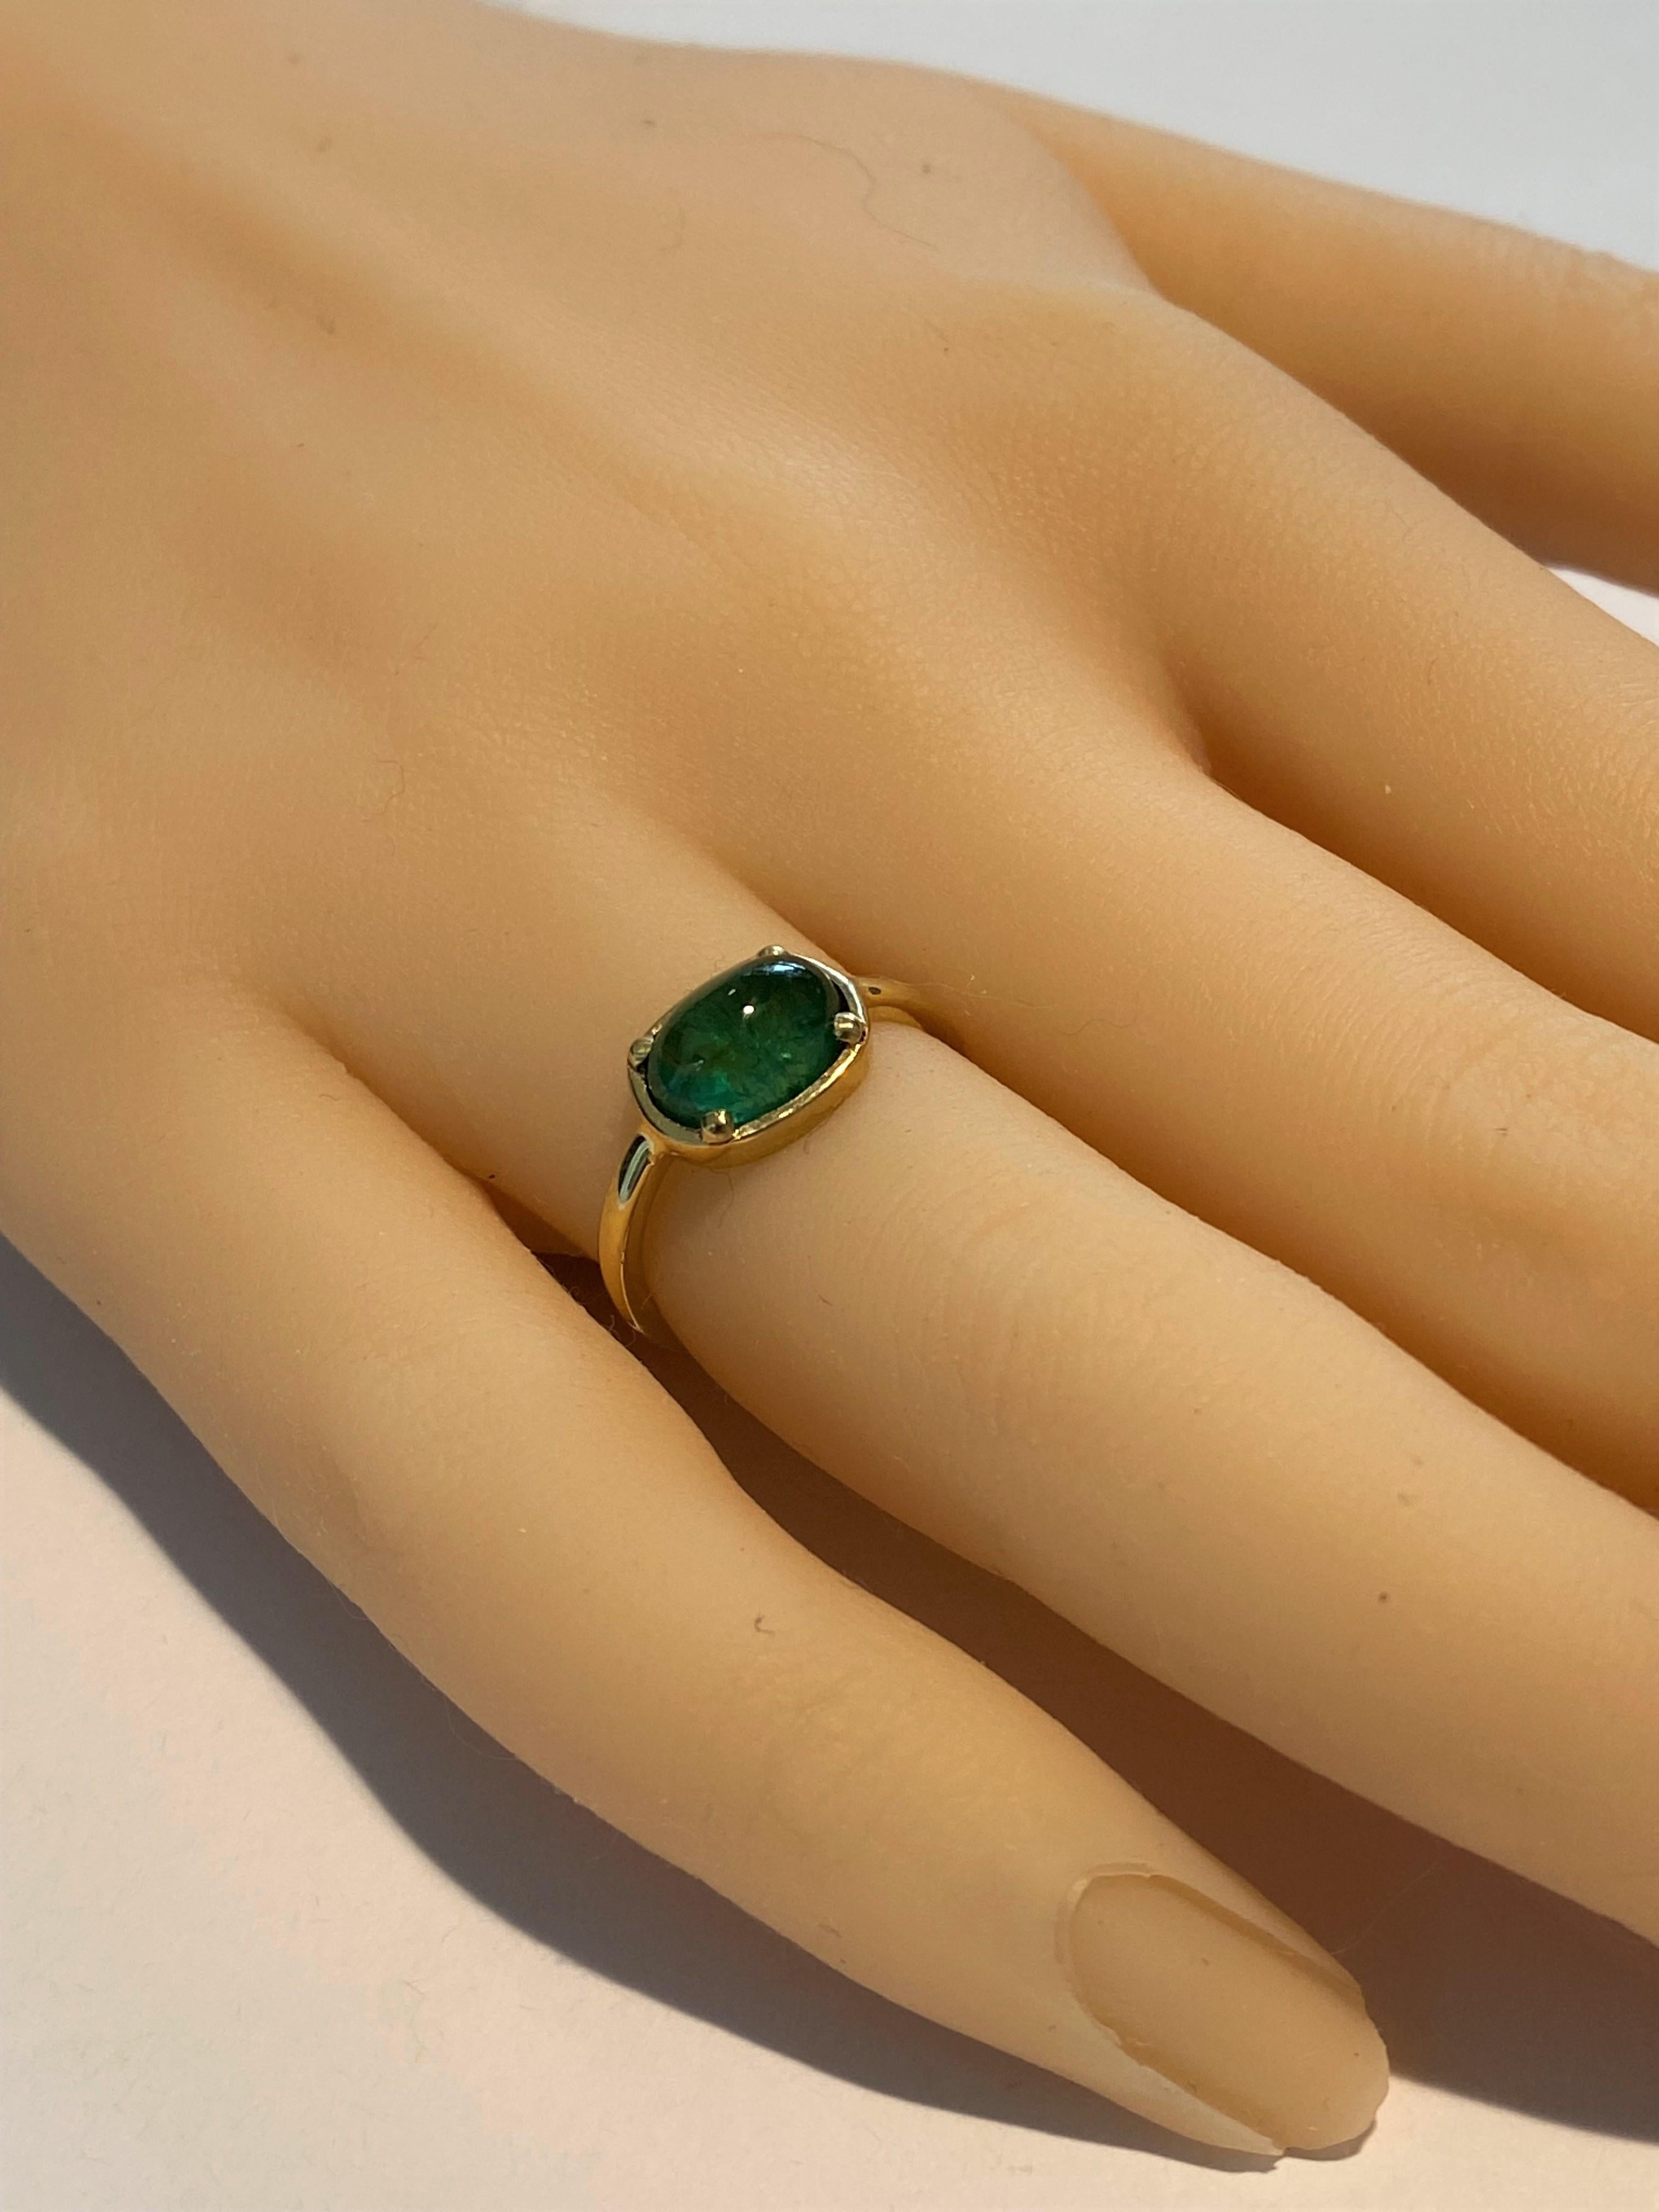 Oval Cut Cabochon Emerald Gold Cocktail Ring Weighing 2.25 Carat